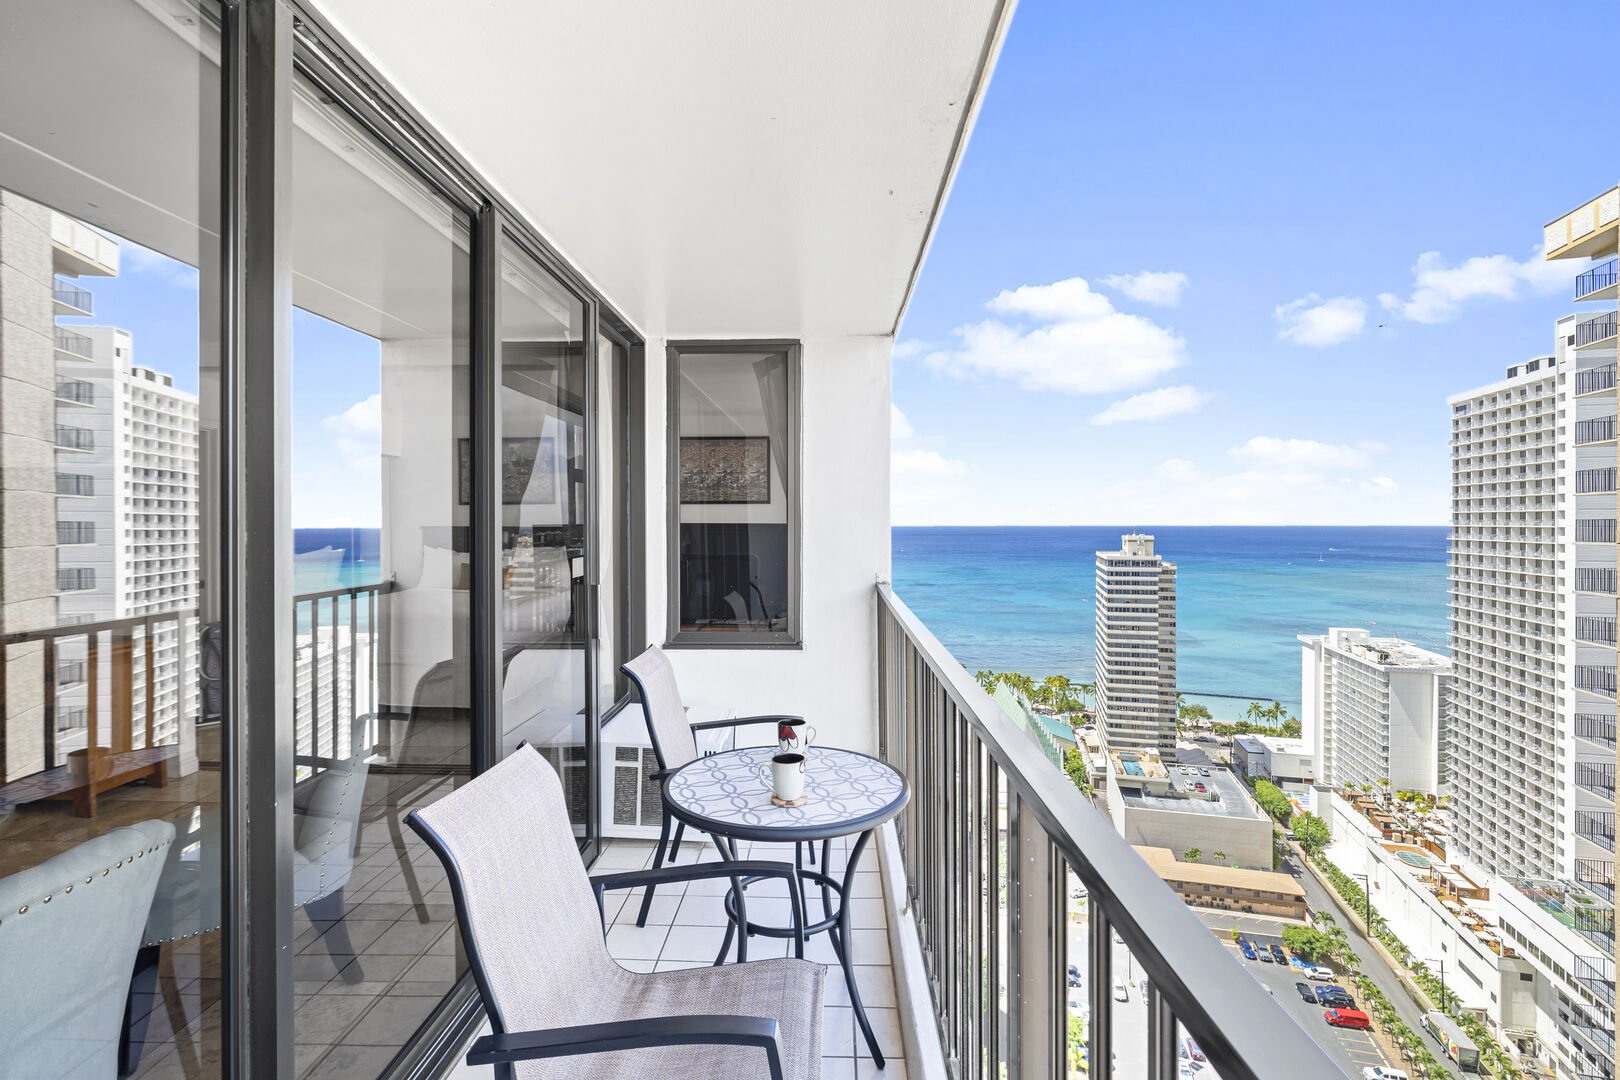 Have your coffee on your balcony with this beautiful ocean view!